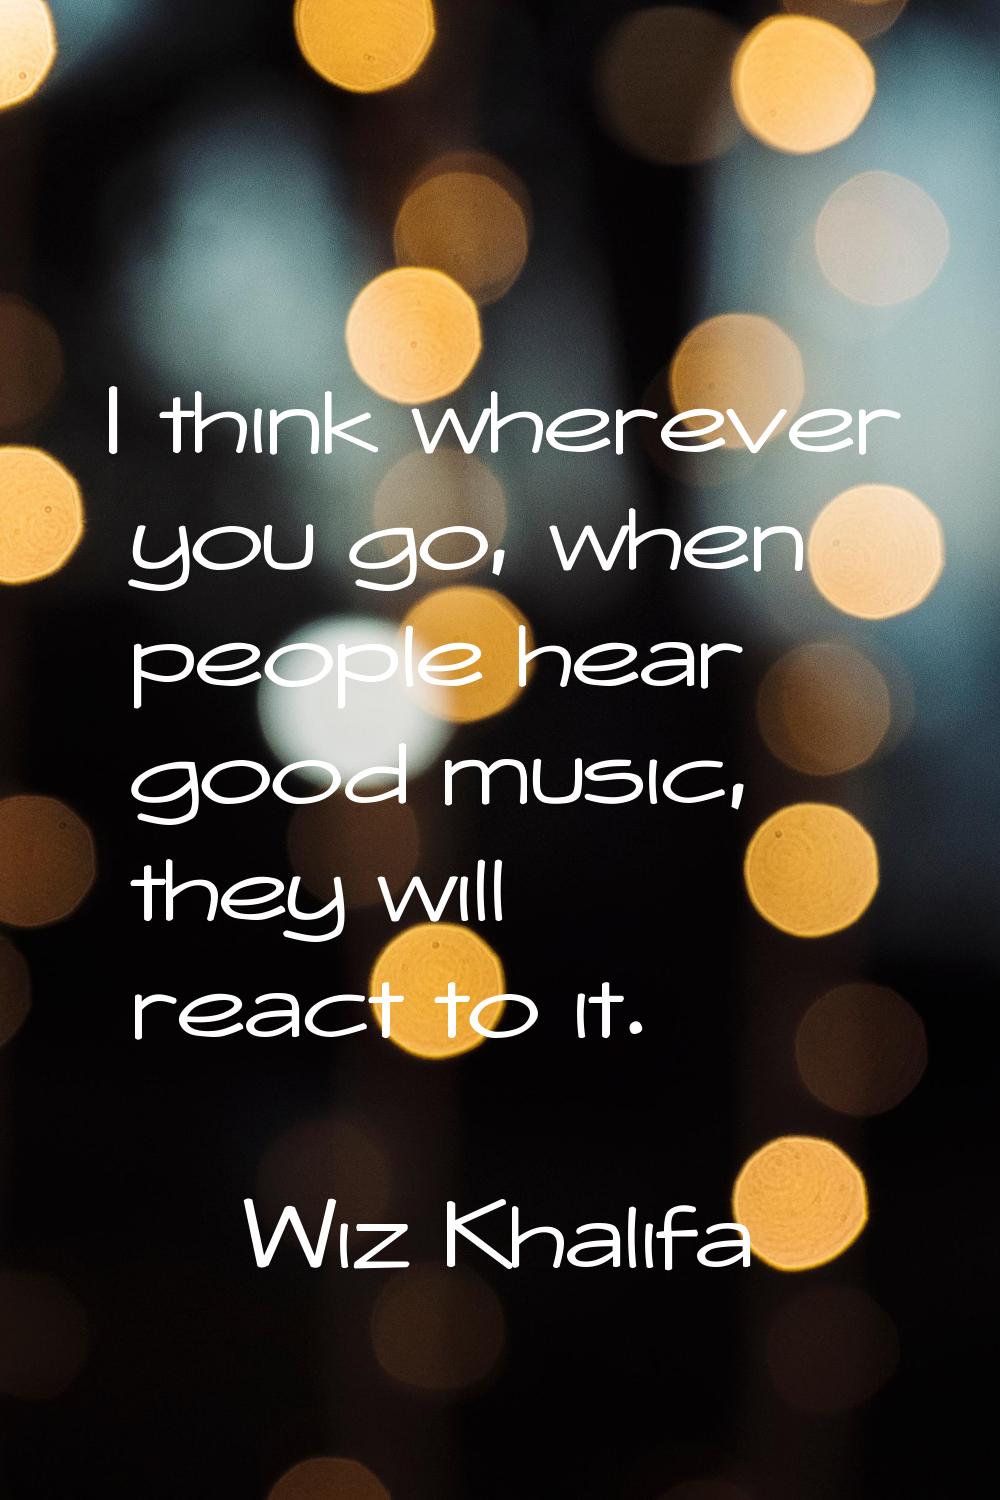 I think wherever you go, when people hear good music, they will react to it.